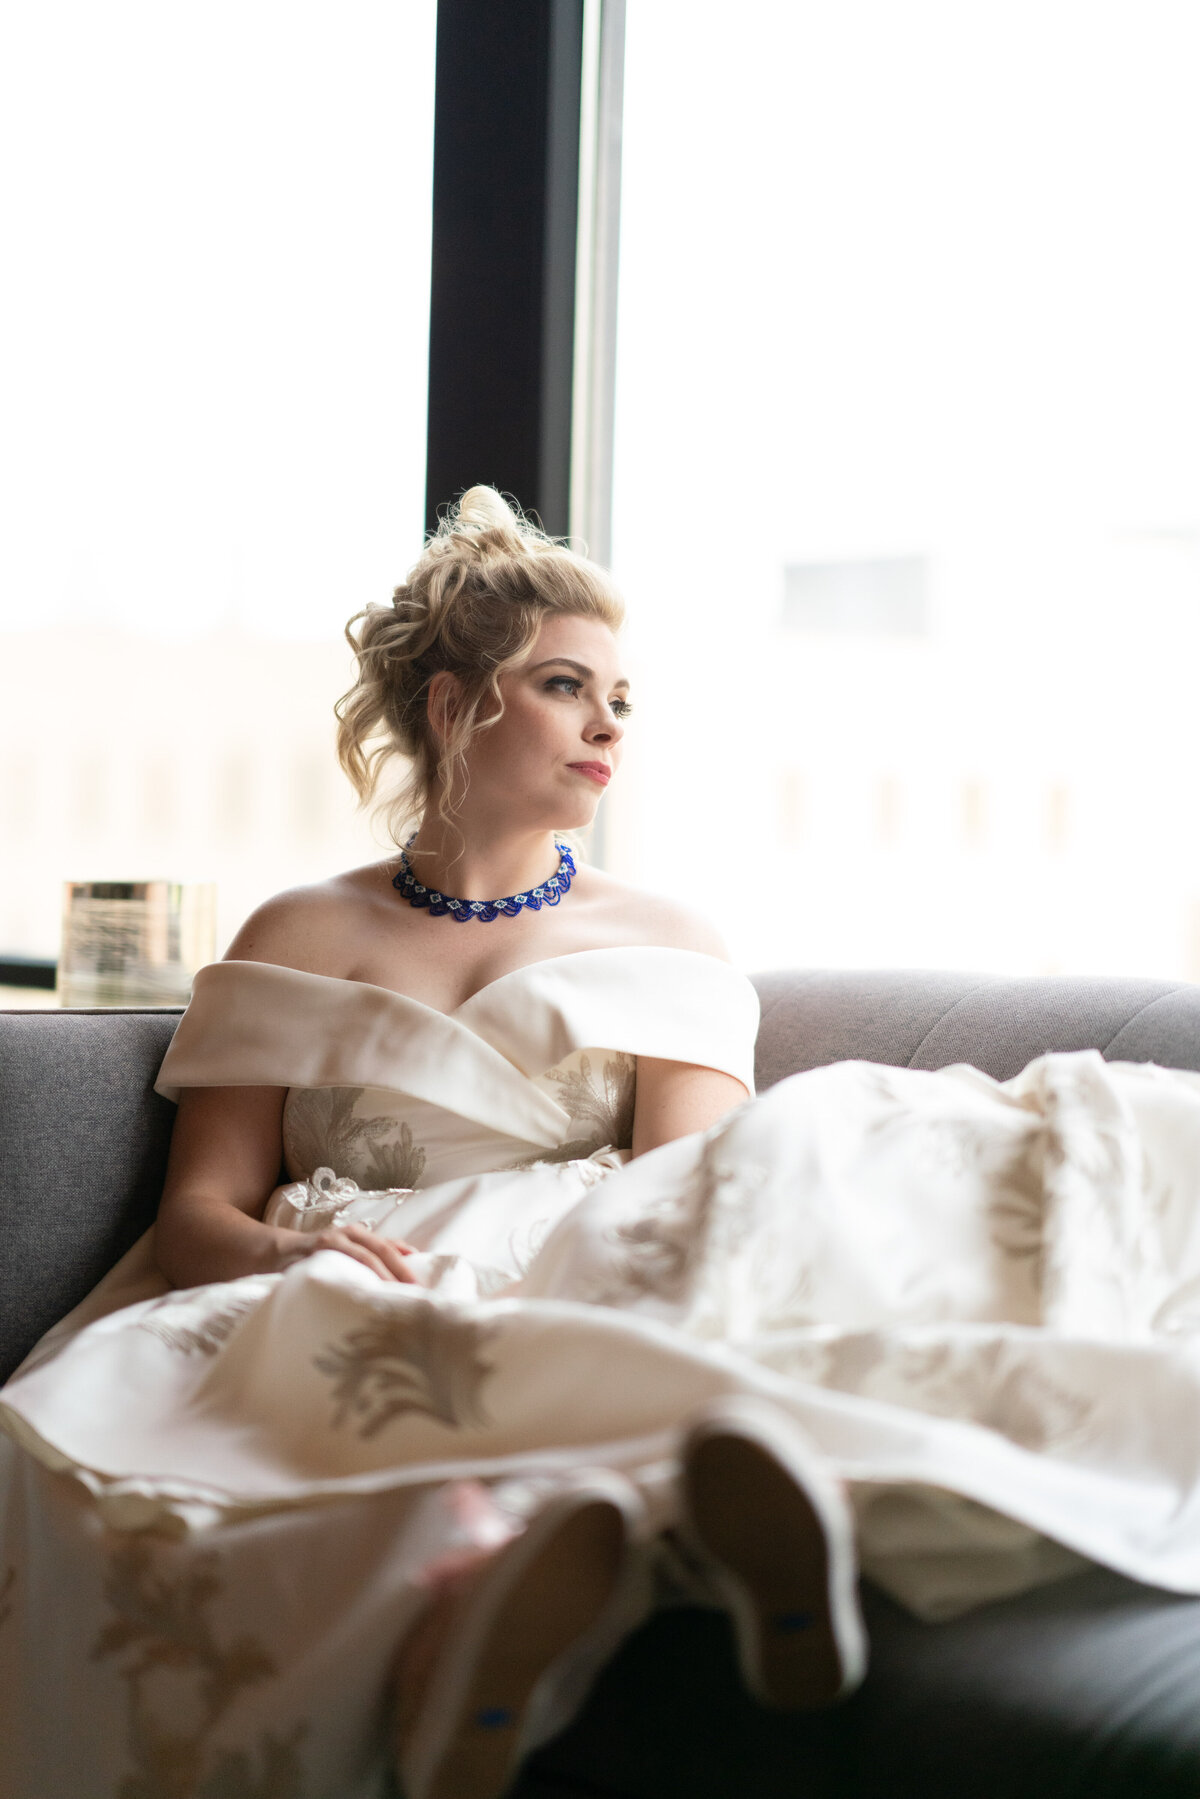 Bride in wedding dress with a blue chocker necklace looks out the window in Saint Paul, Minnesota.